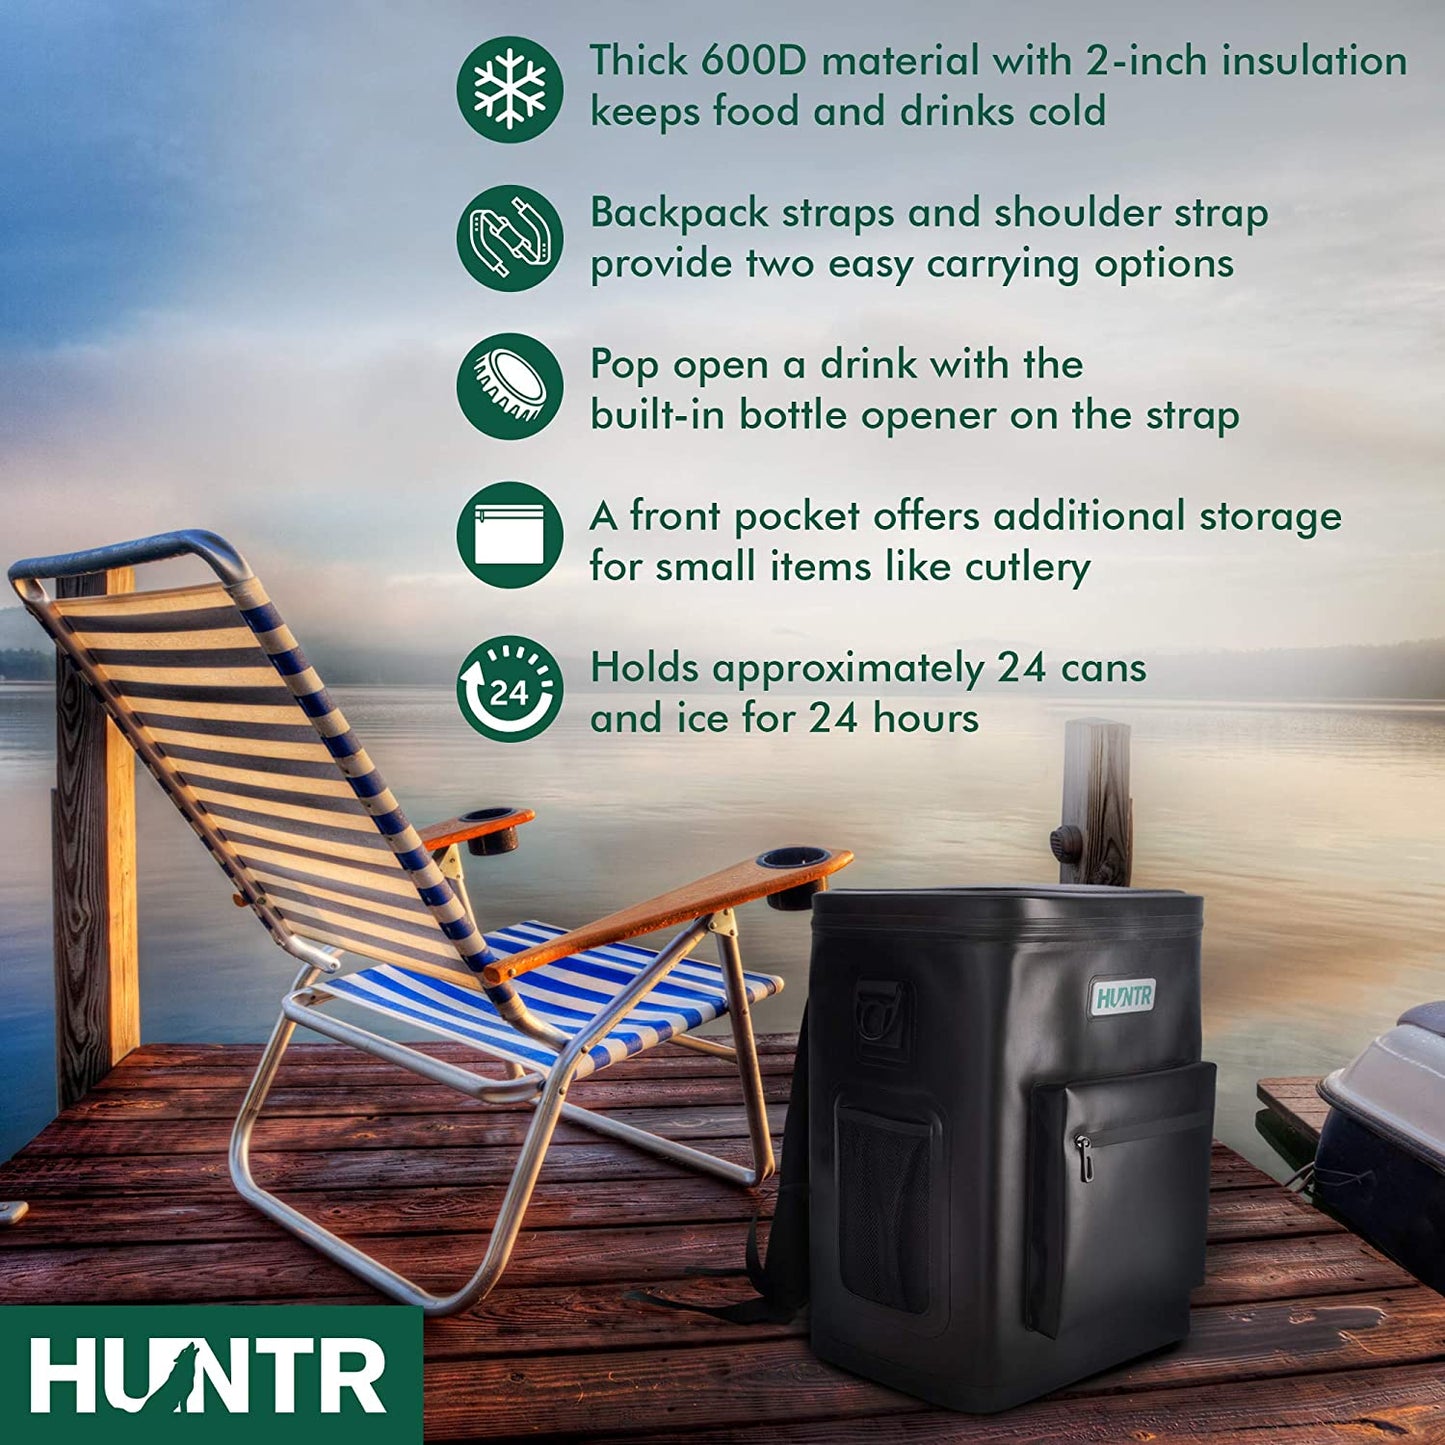 HUNTR Insulated Cooler Backpack